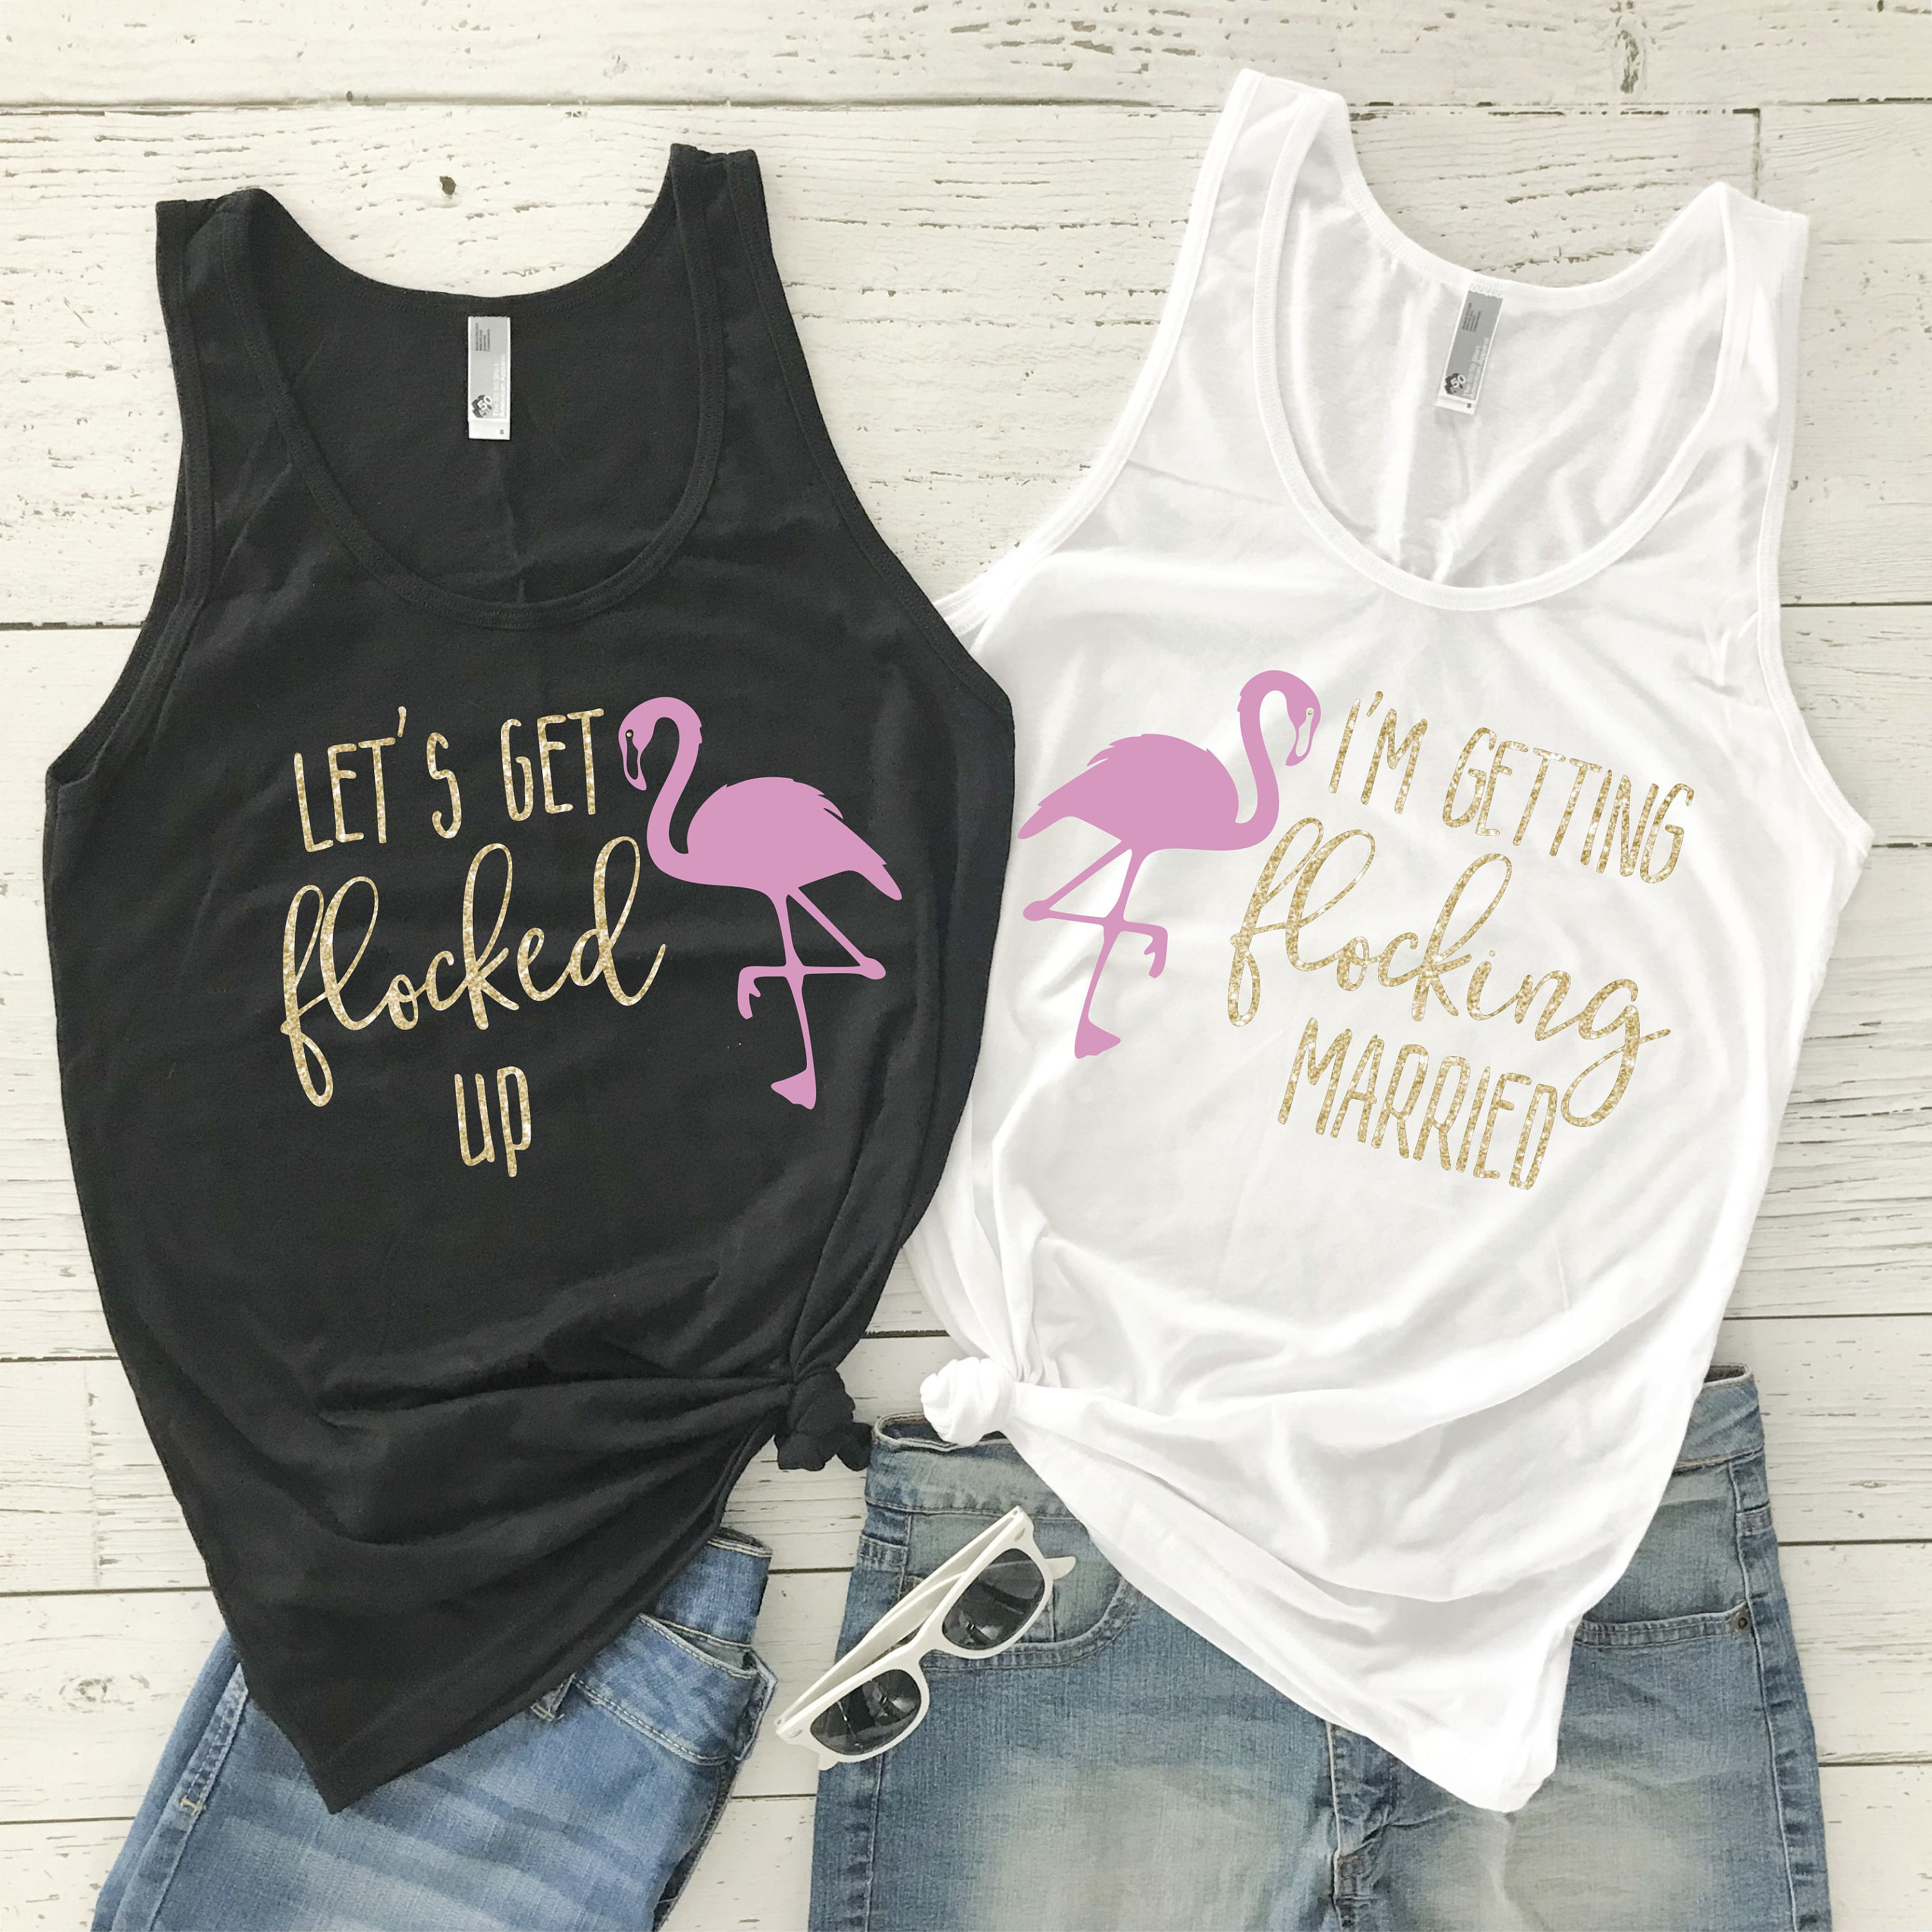 Flamingo Bachelorette Party Shirts Let\'s Get Flocked Up Tank I\'m Getting  Flocking Married Bridal Party Shirts Flamingo Bridesmaid - Etsy Österreich